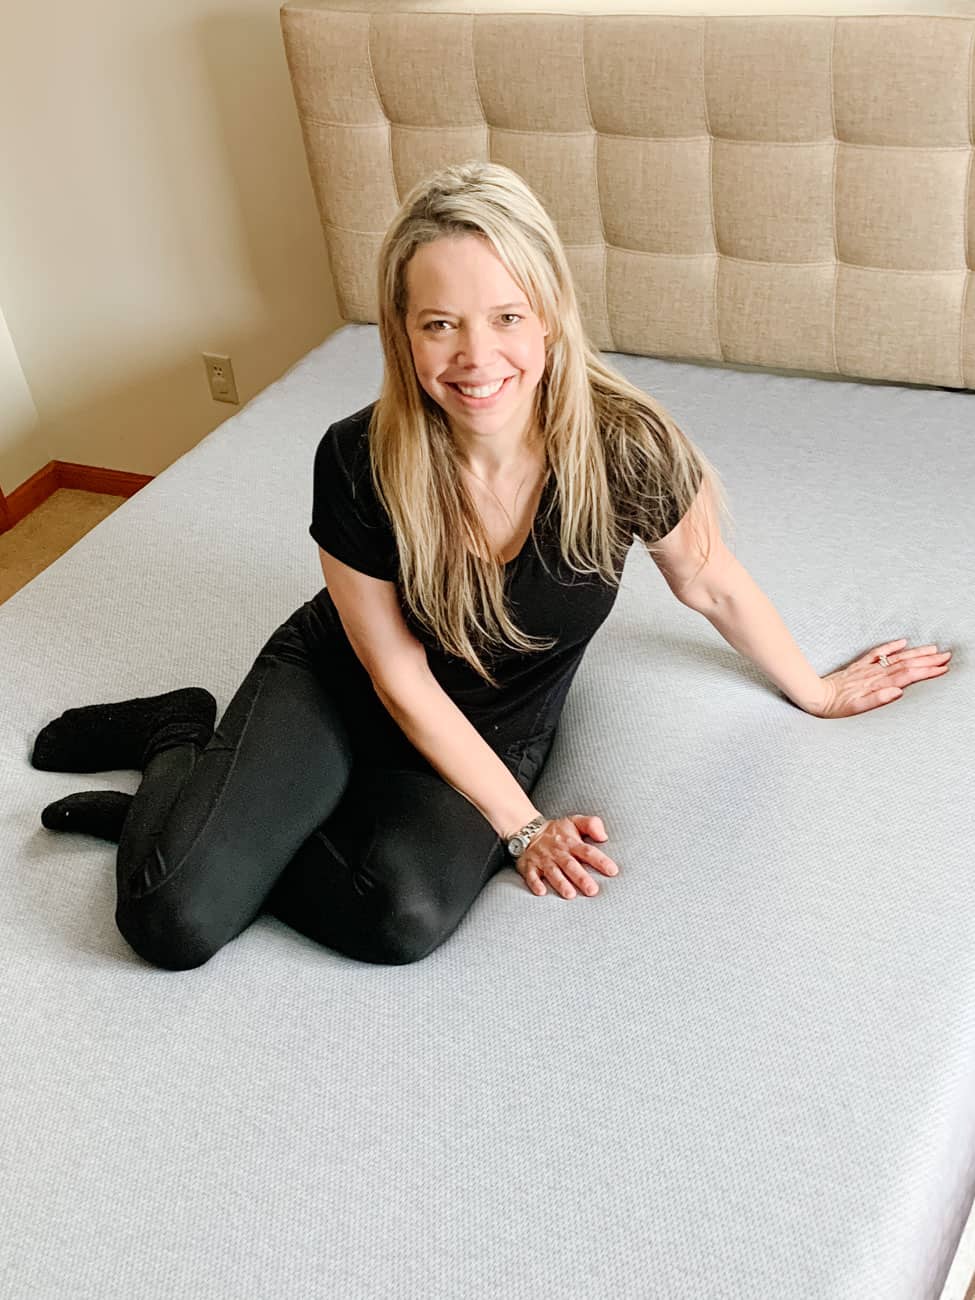 Sitting on a grey covered sports mattress